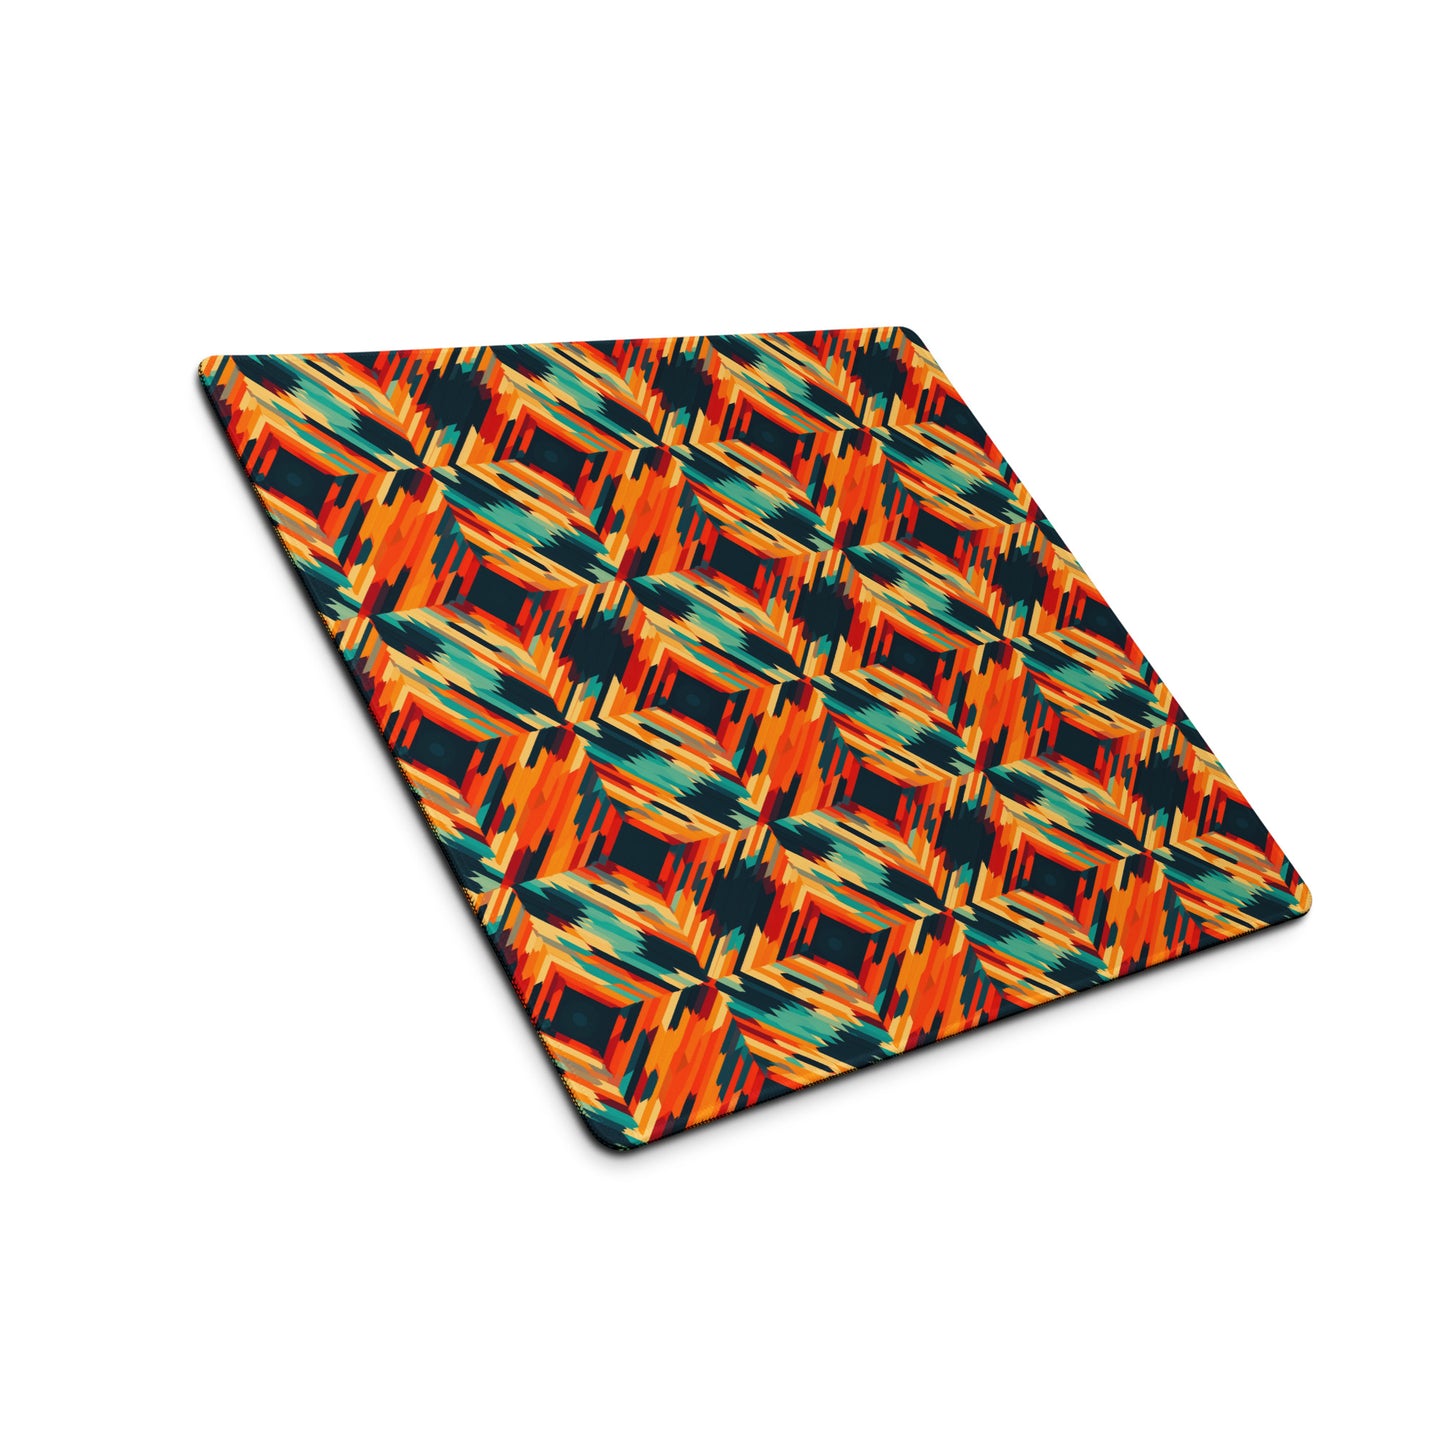 A 18" x 16" desk pad with a tiled abstract pattern on it shown at an angle. Orange in color.